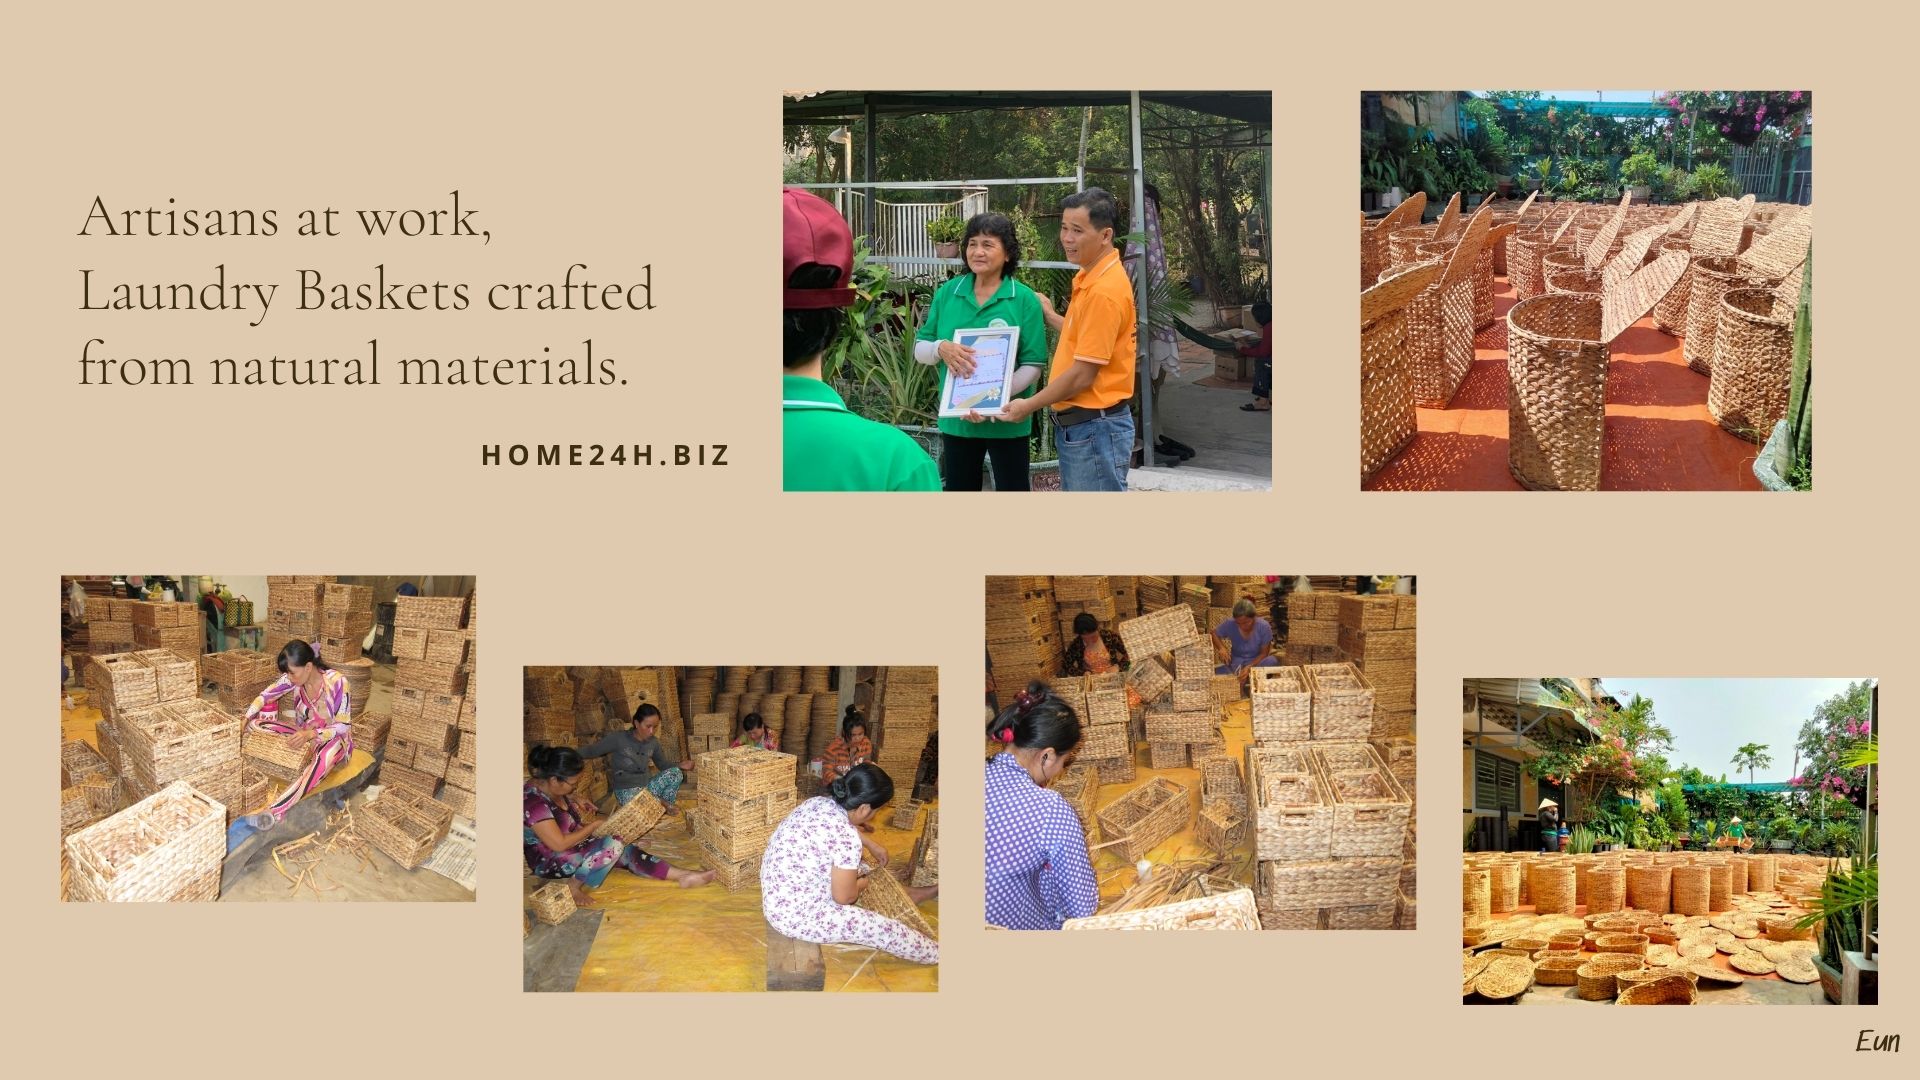 Artisans At Work, Laundry Baskets Crafted From Natural Materials.